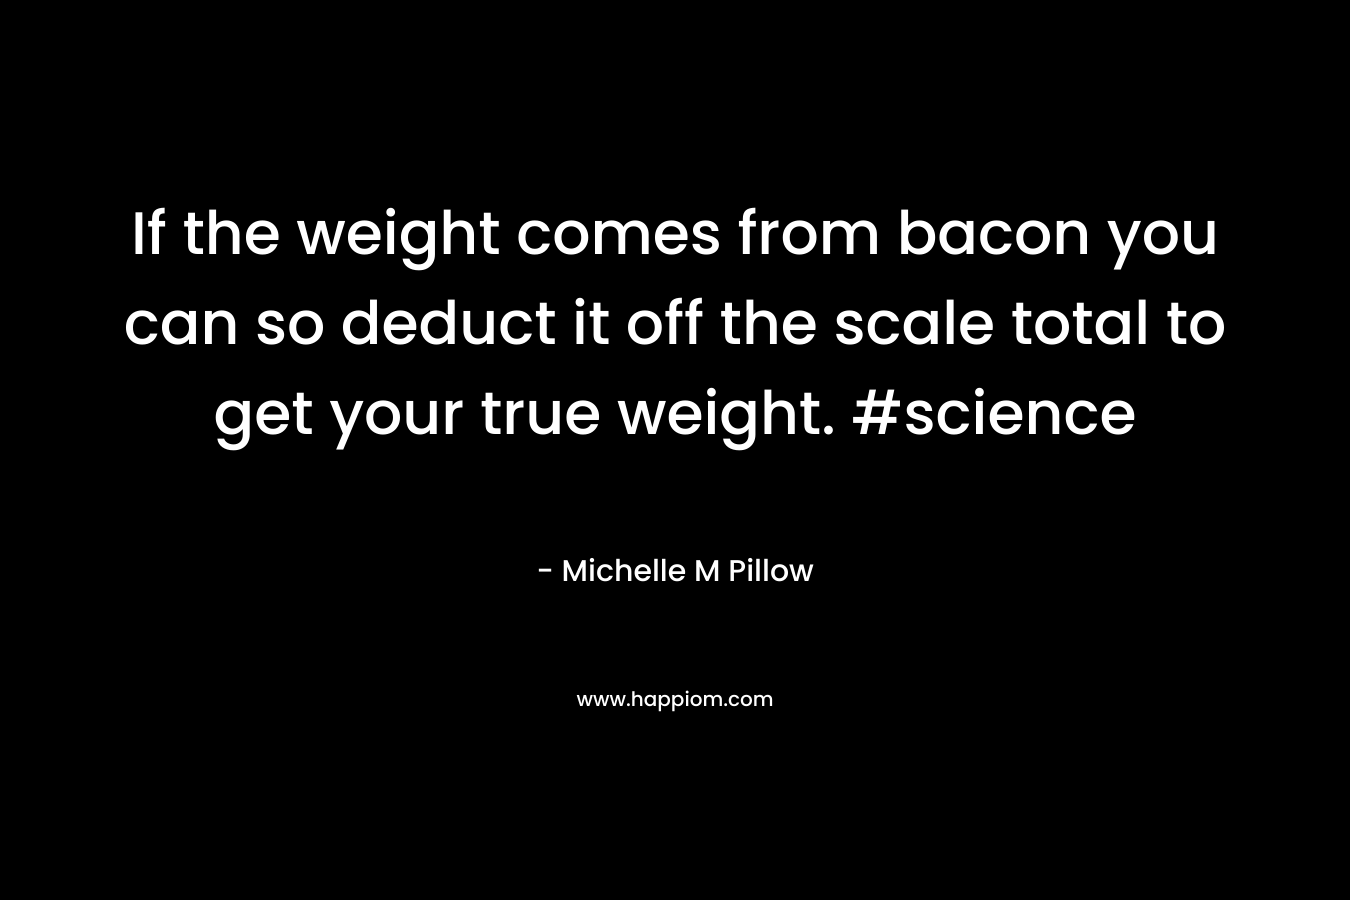 If the weight comes from bacon you can so deduct it off the scale total to get your true weight. #science